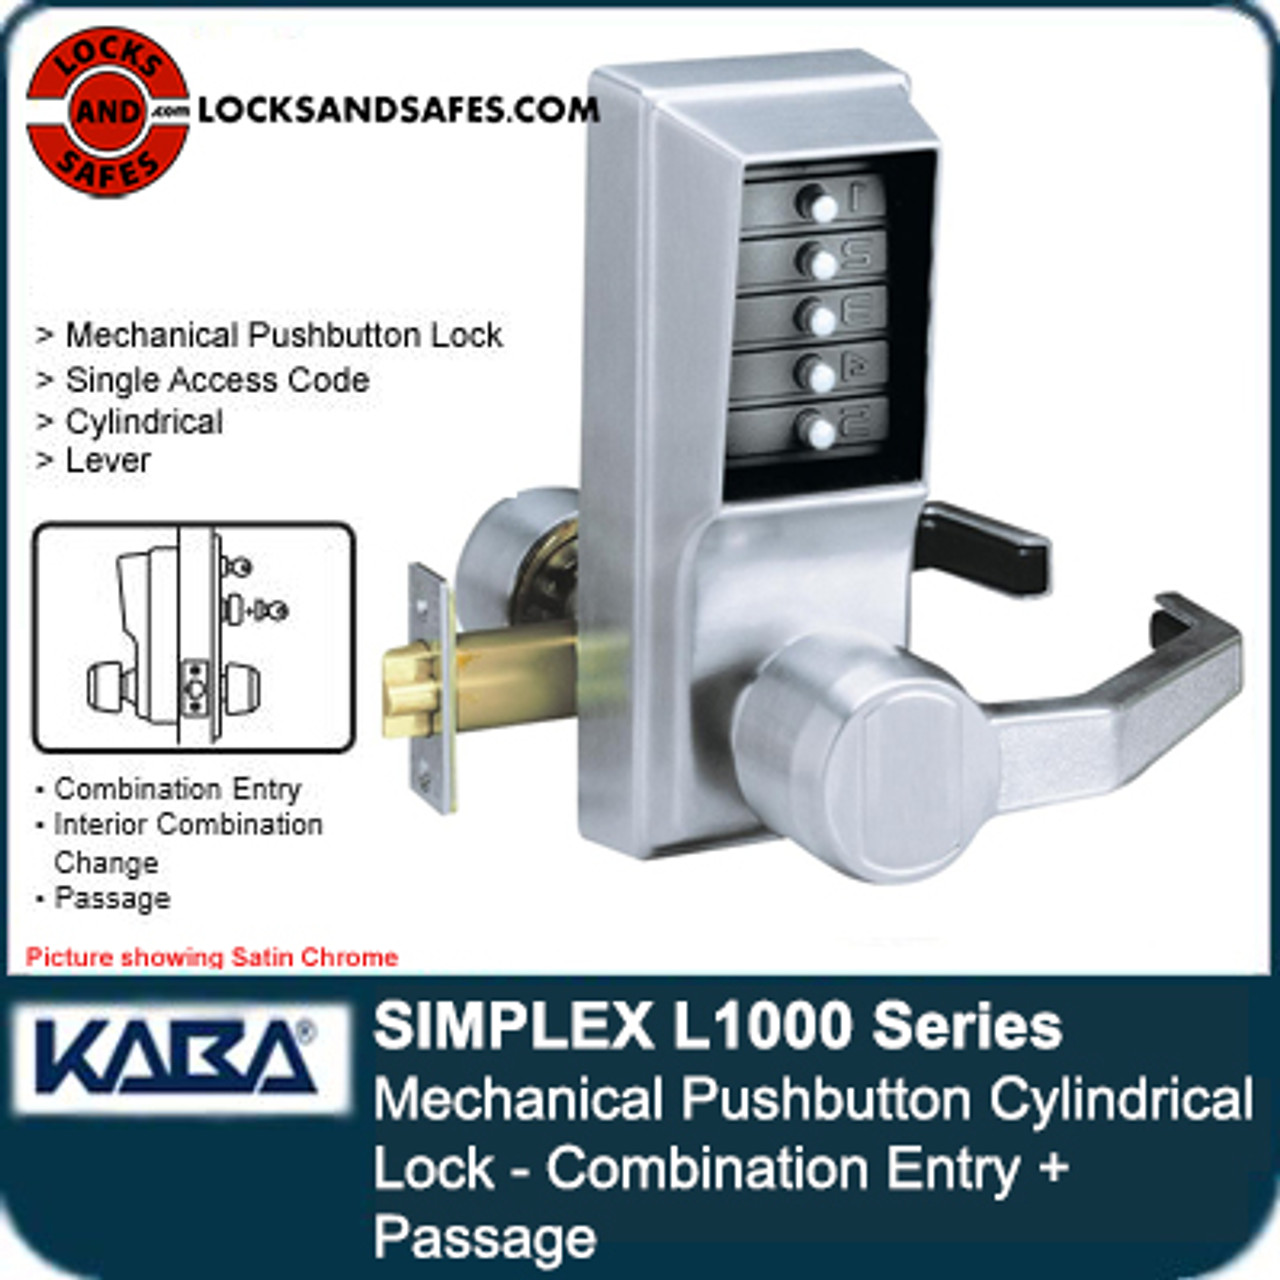 Kaba Simplex L1000 Series Metal Mechanical Pushbutton Cylindrical Lock with Lever,13mm Throw Latch, 70mm Backset, R C Schlage, Core Not Included - 1